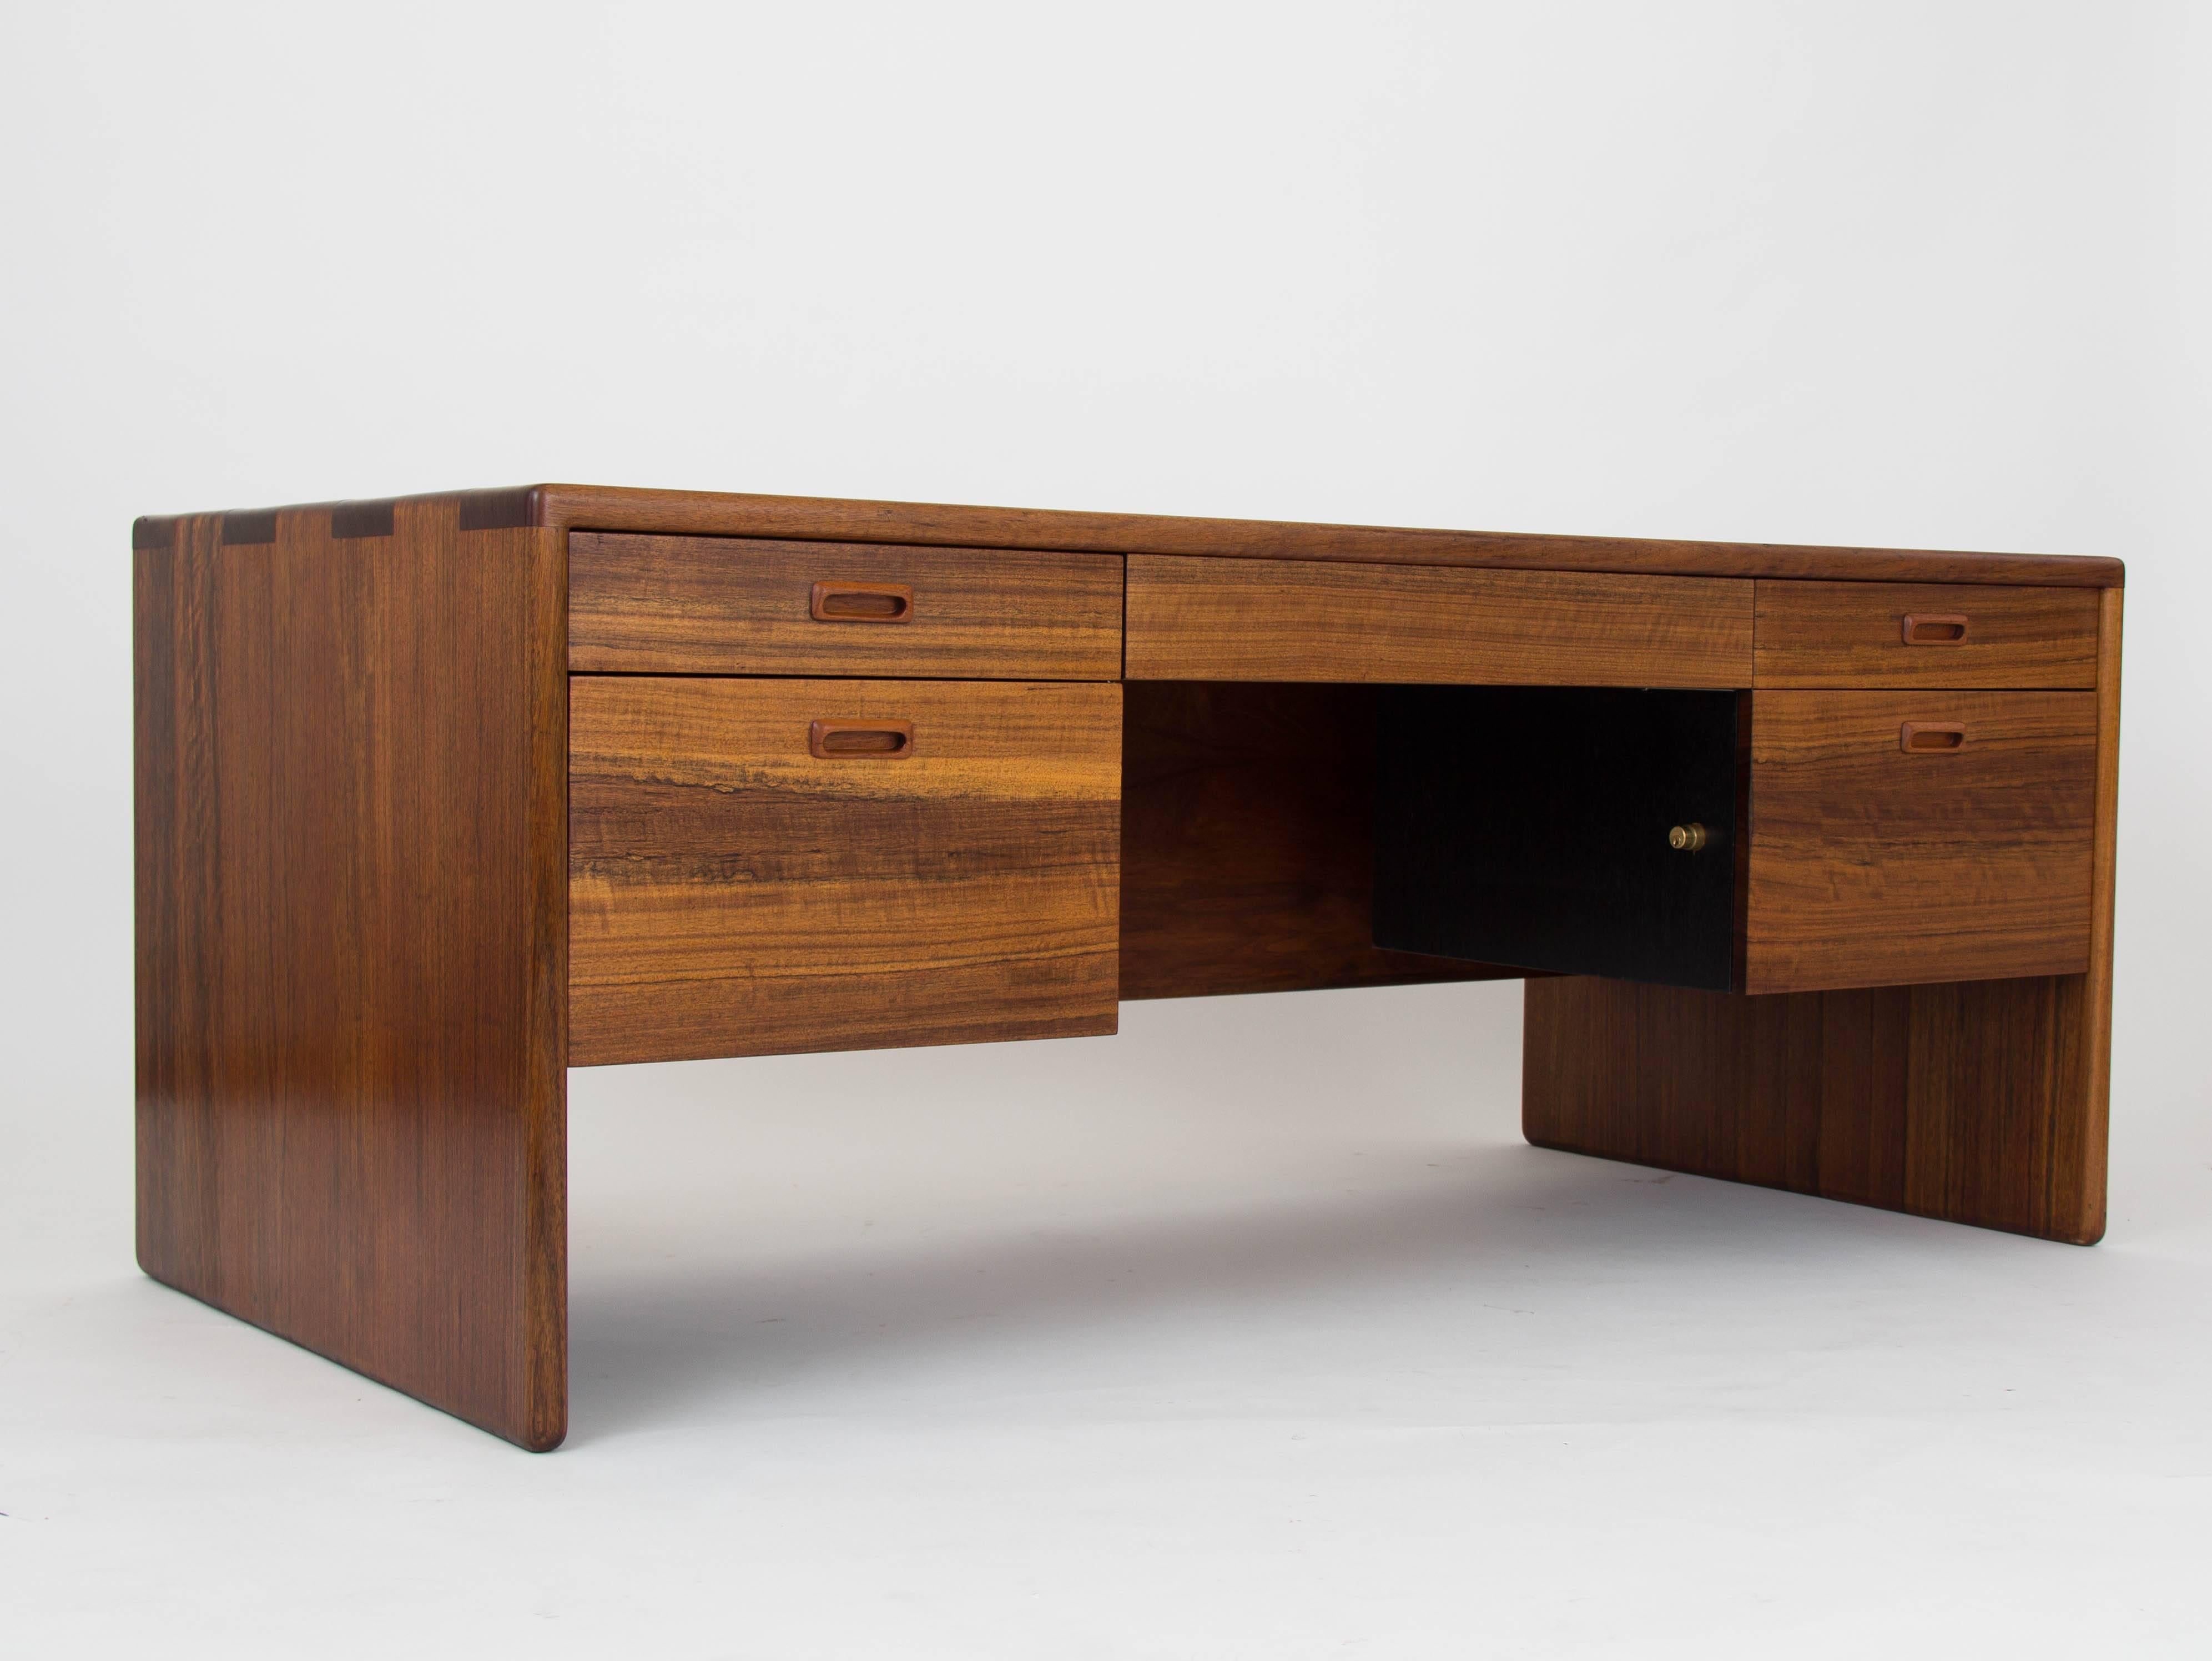 A large executive desk by Southern California designer Gerald McCabe for his own company Erin Furniture. The piece, executed in a deep brown Shedua wood, has a simple case with exaggerated finger joints and rounded corners. A modesty panel covers